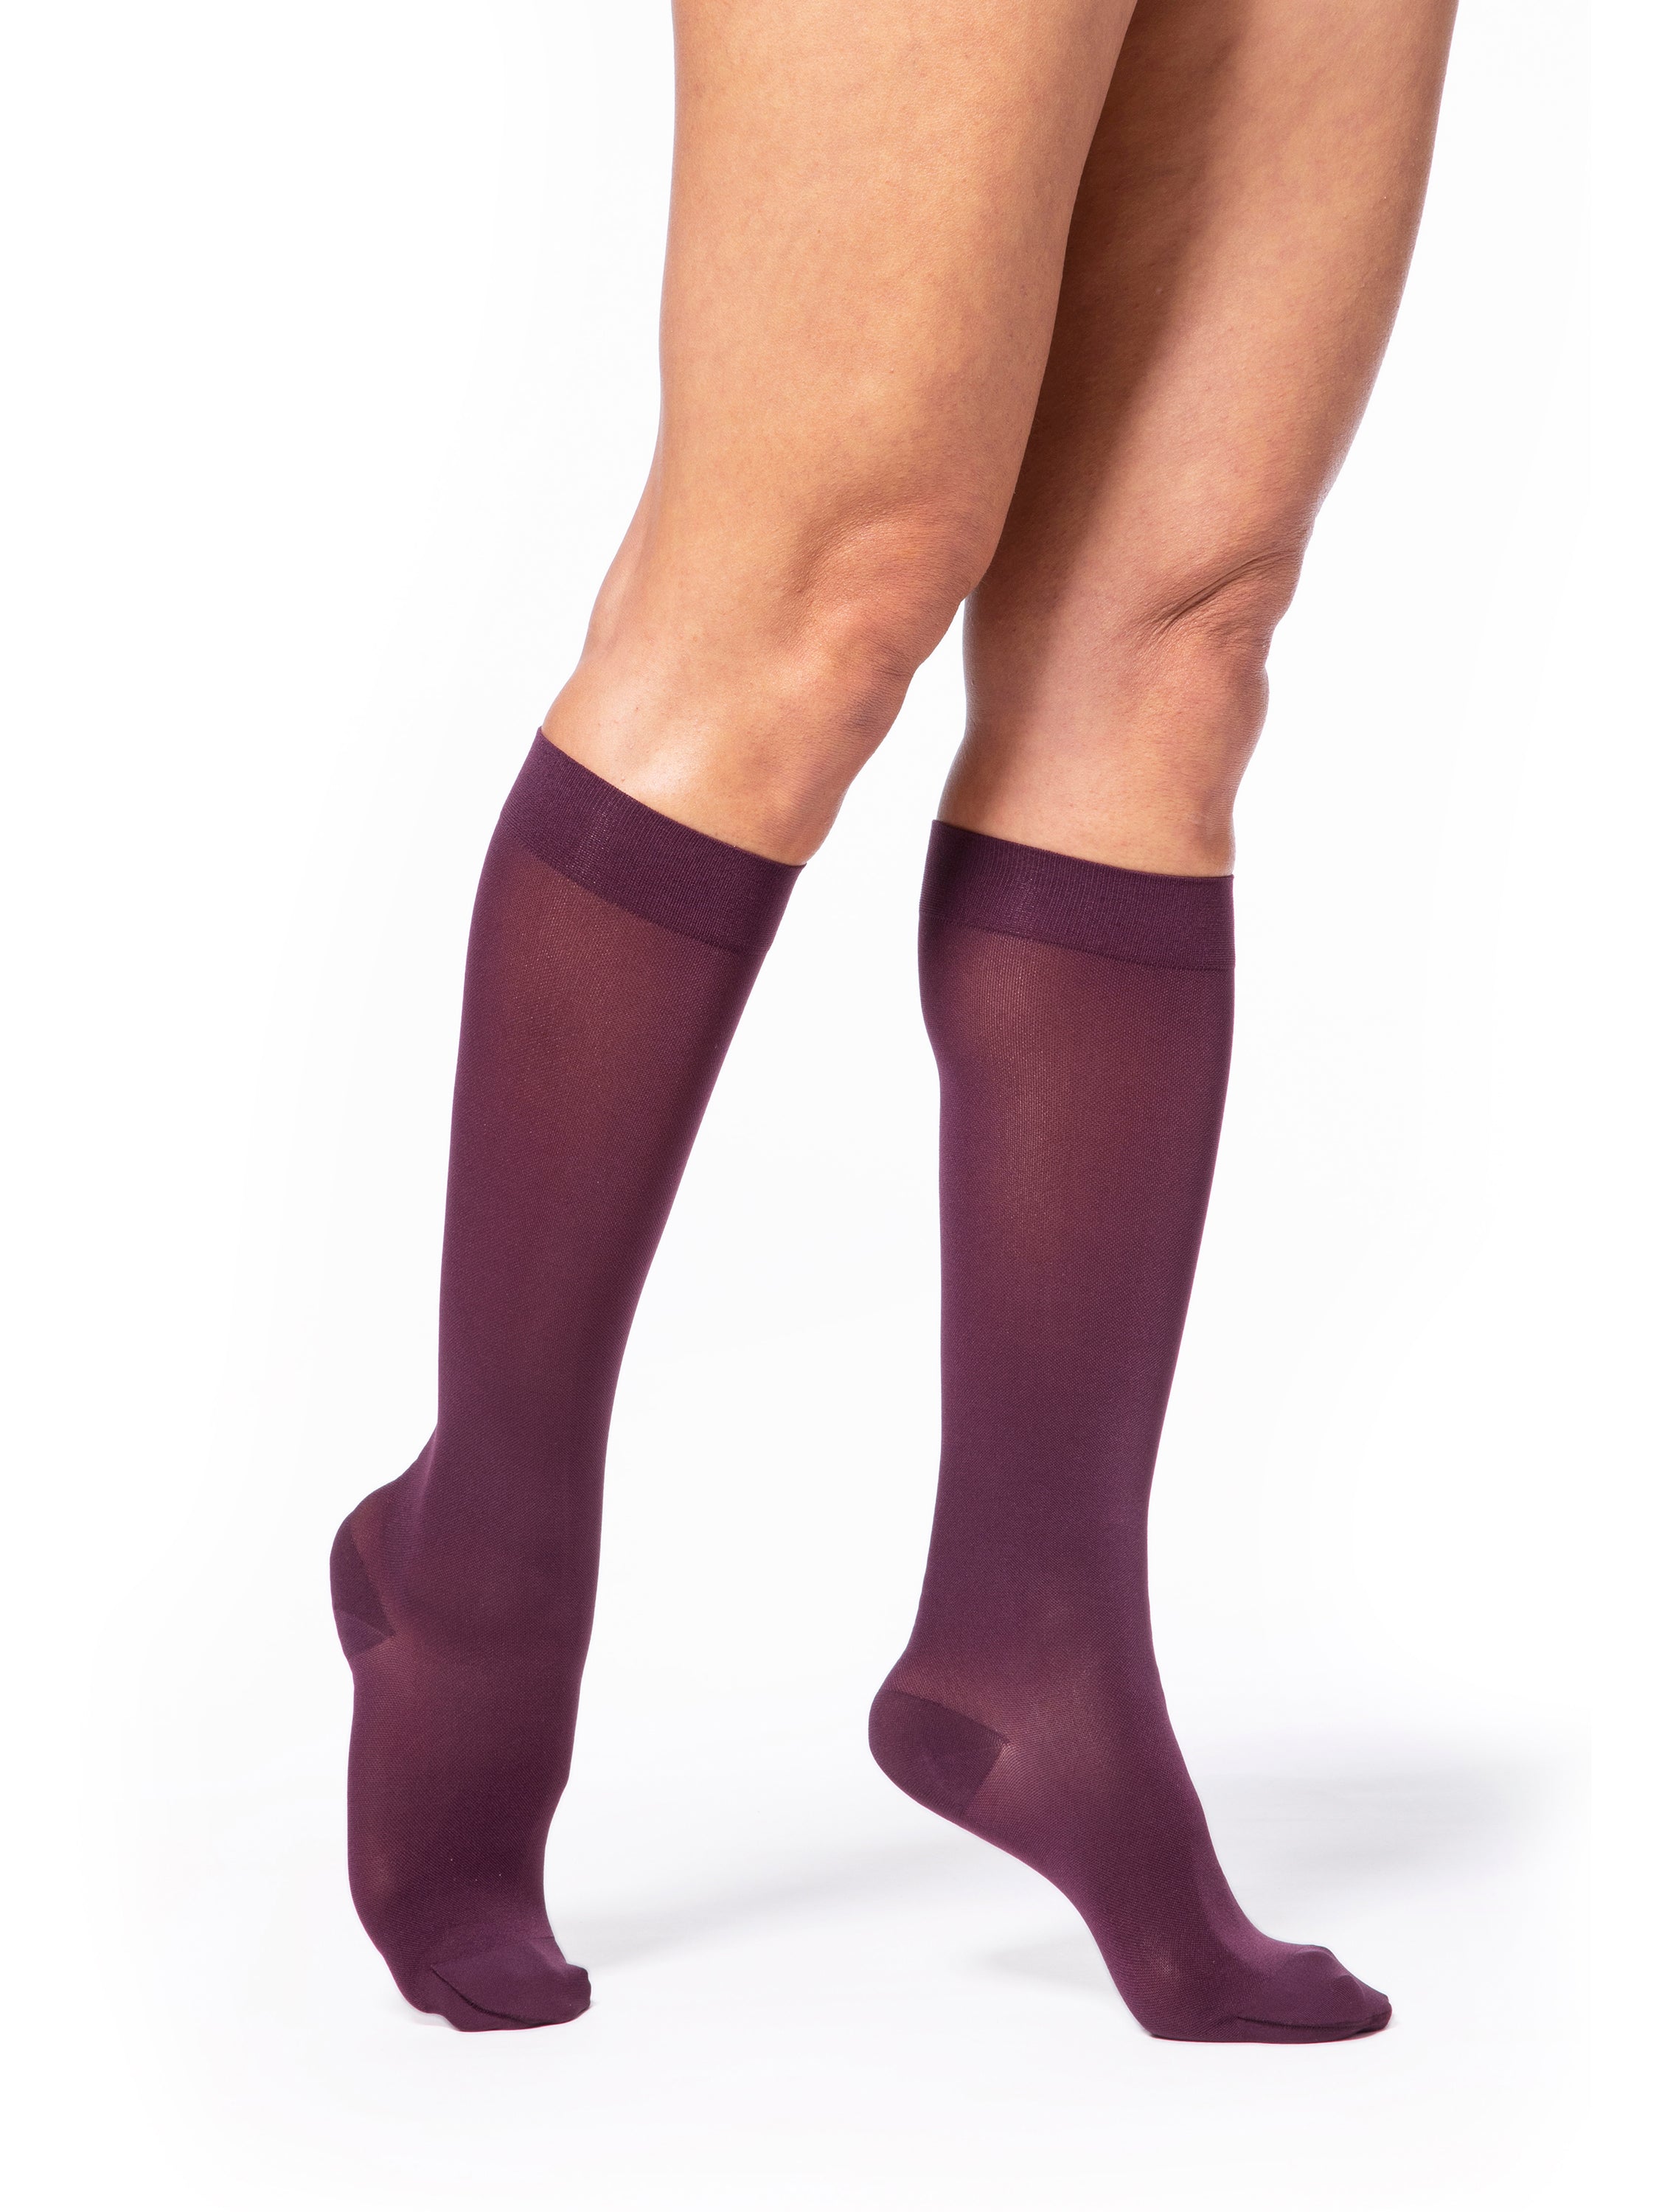 Sigvaris Women's Style Soft Opaque Knee High in Fashion Colors